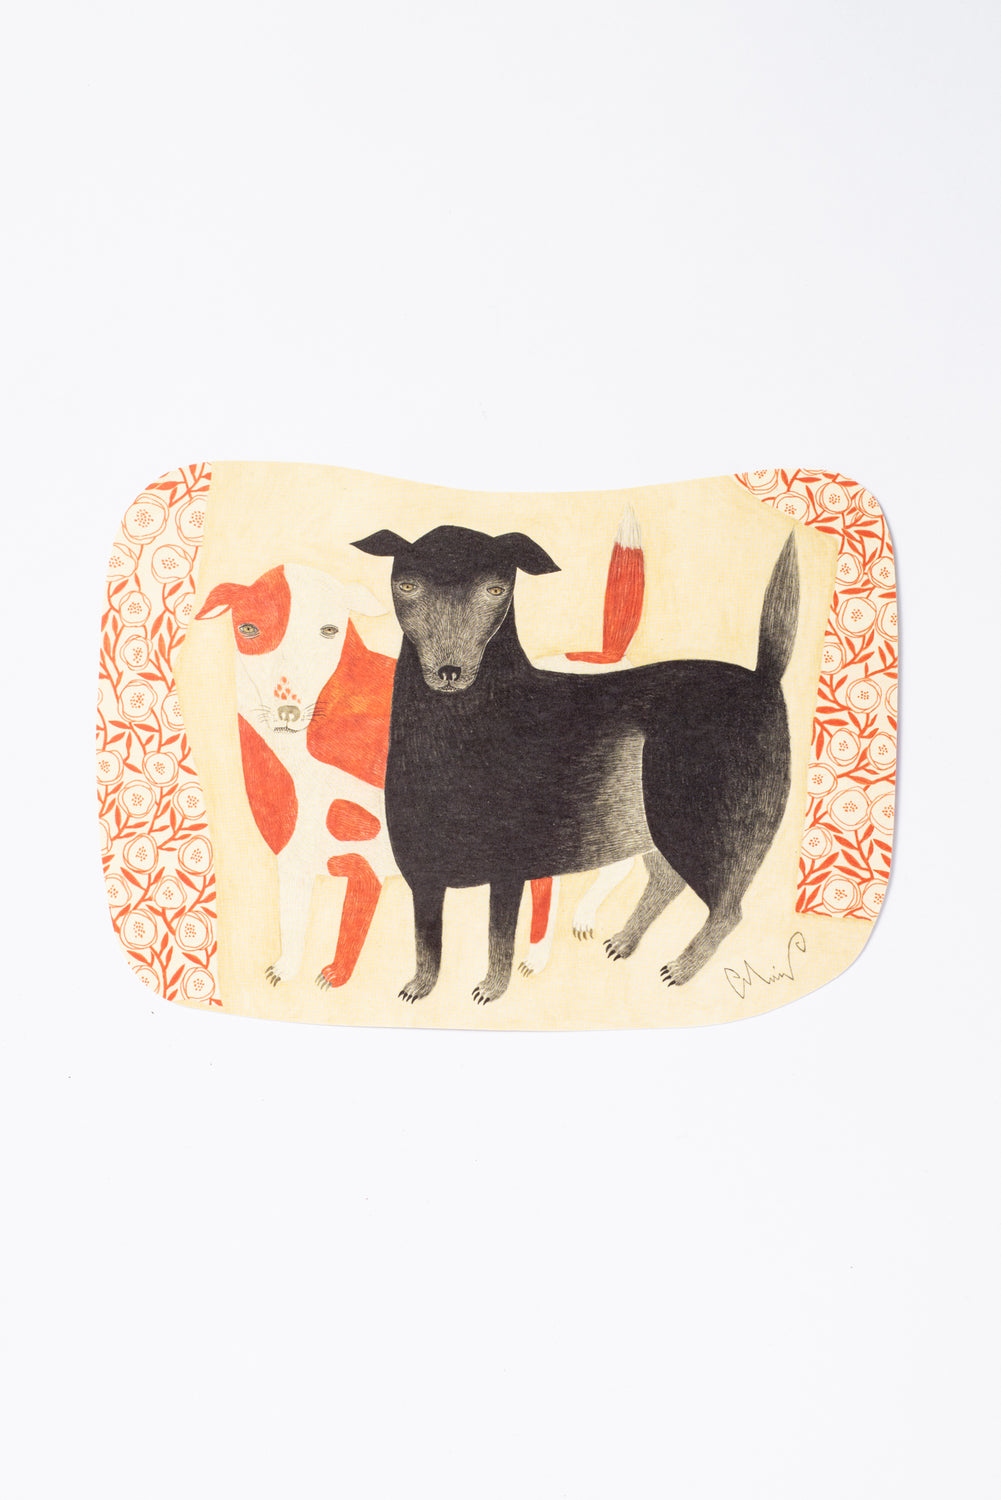 Illustrated Card, "Black Dog Chalk and Red Spot Dog"